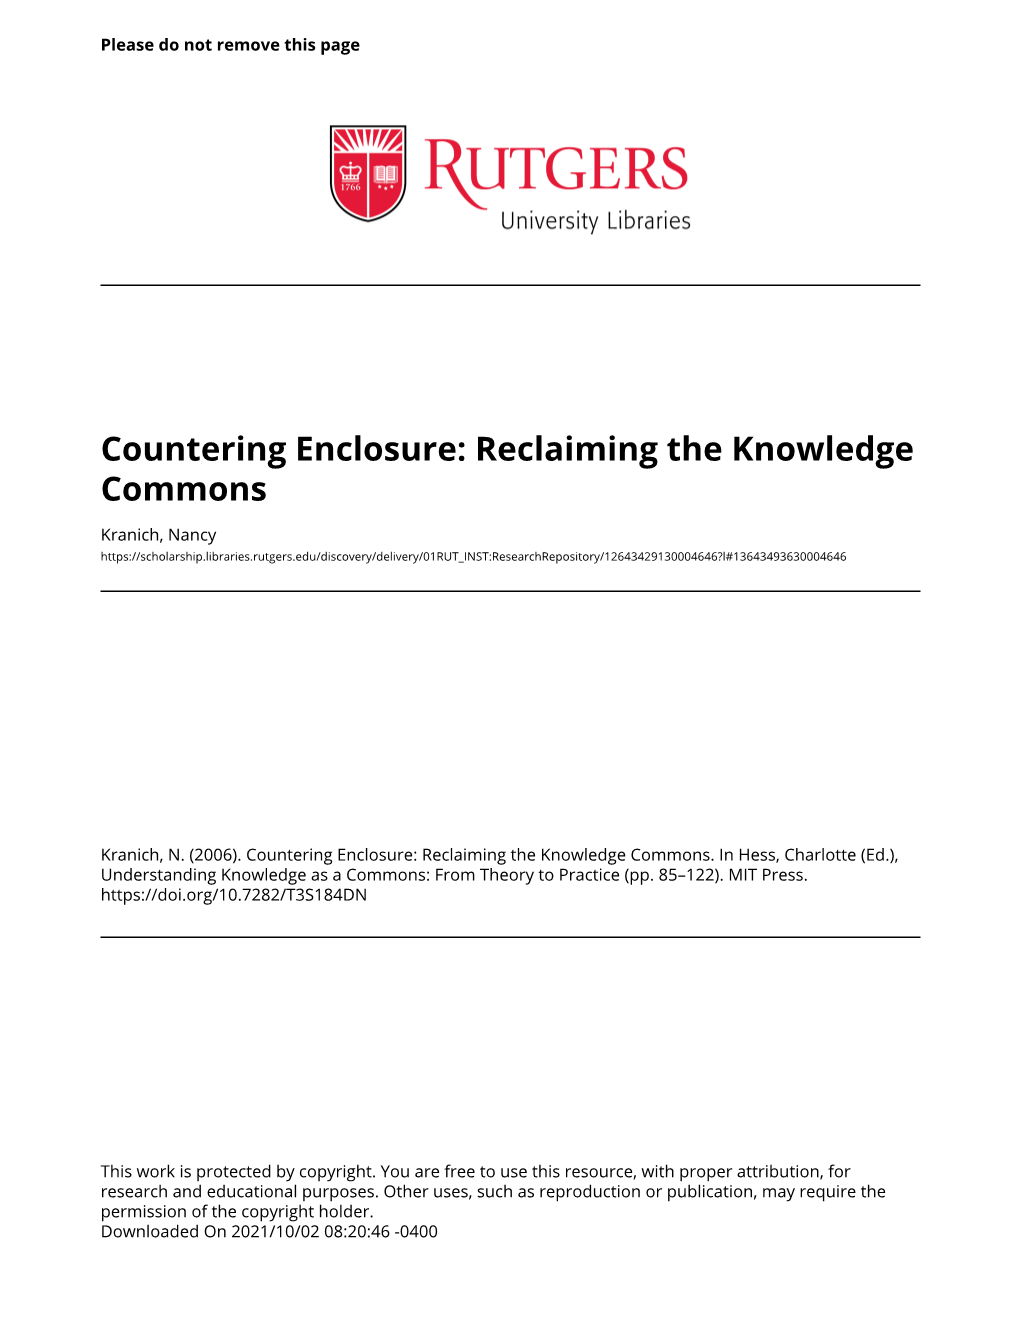 Reclaiming the Knowledge Commons